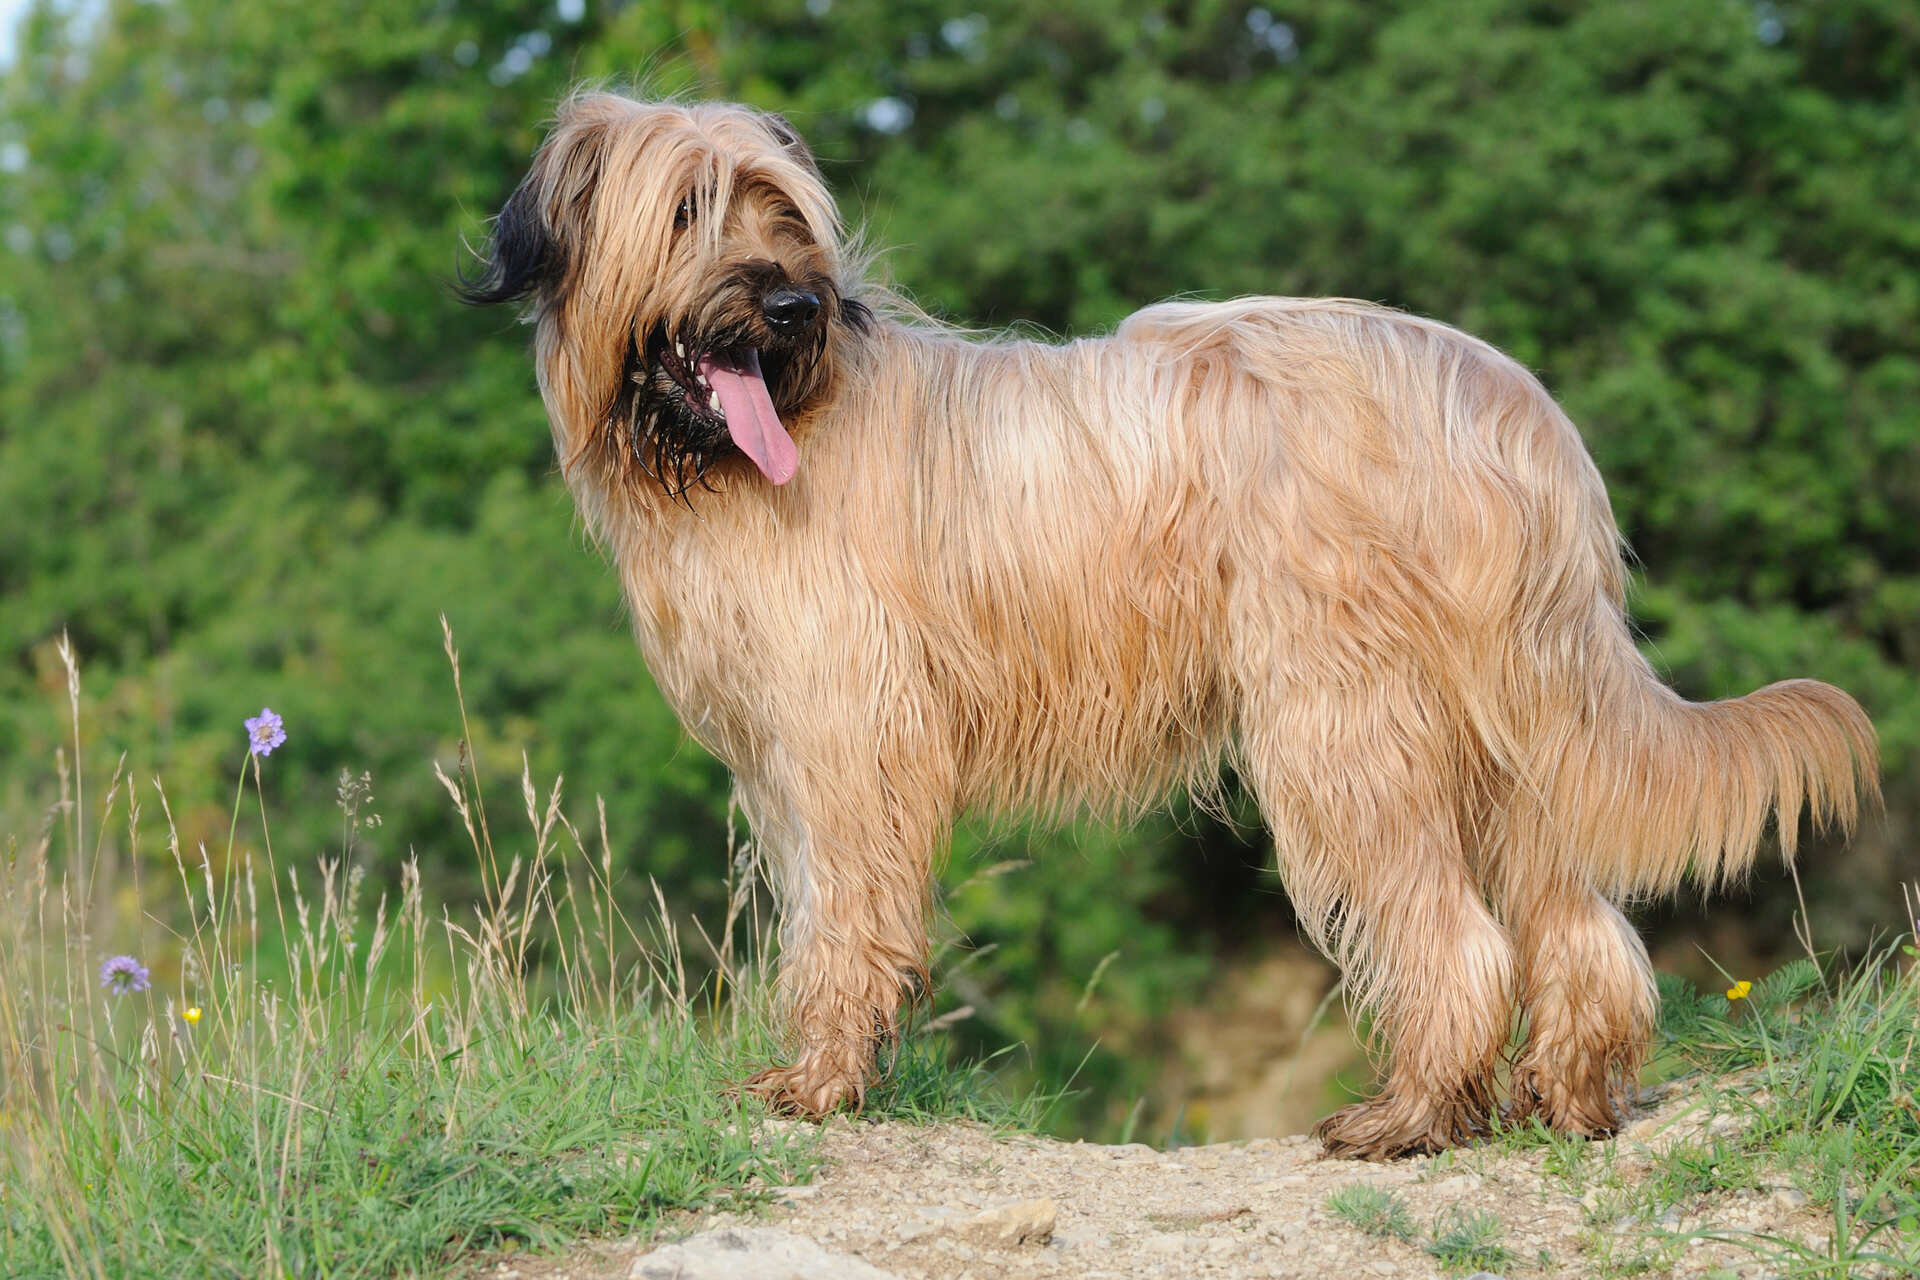 A Briard dog standing in a forest